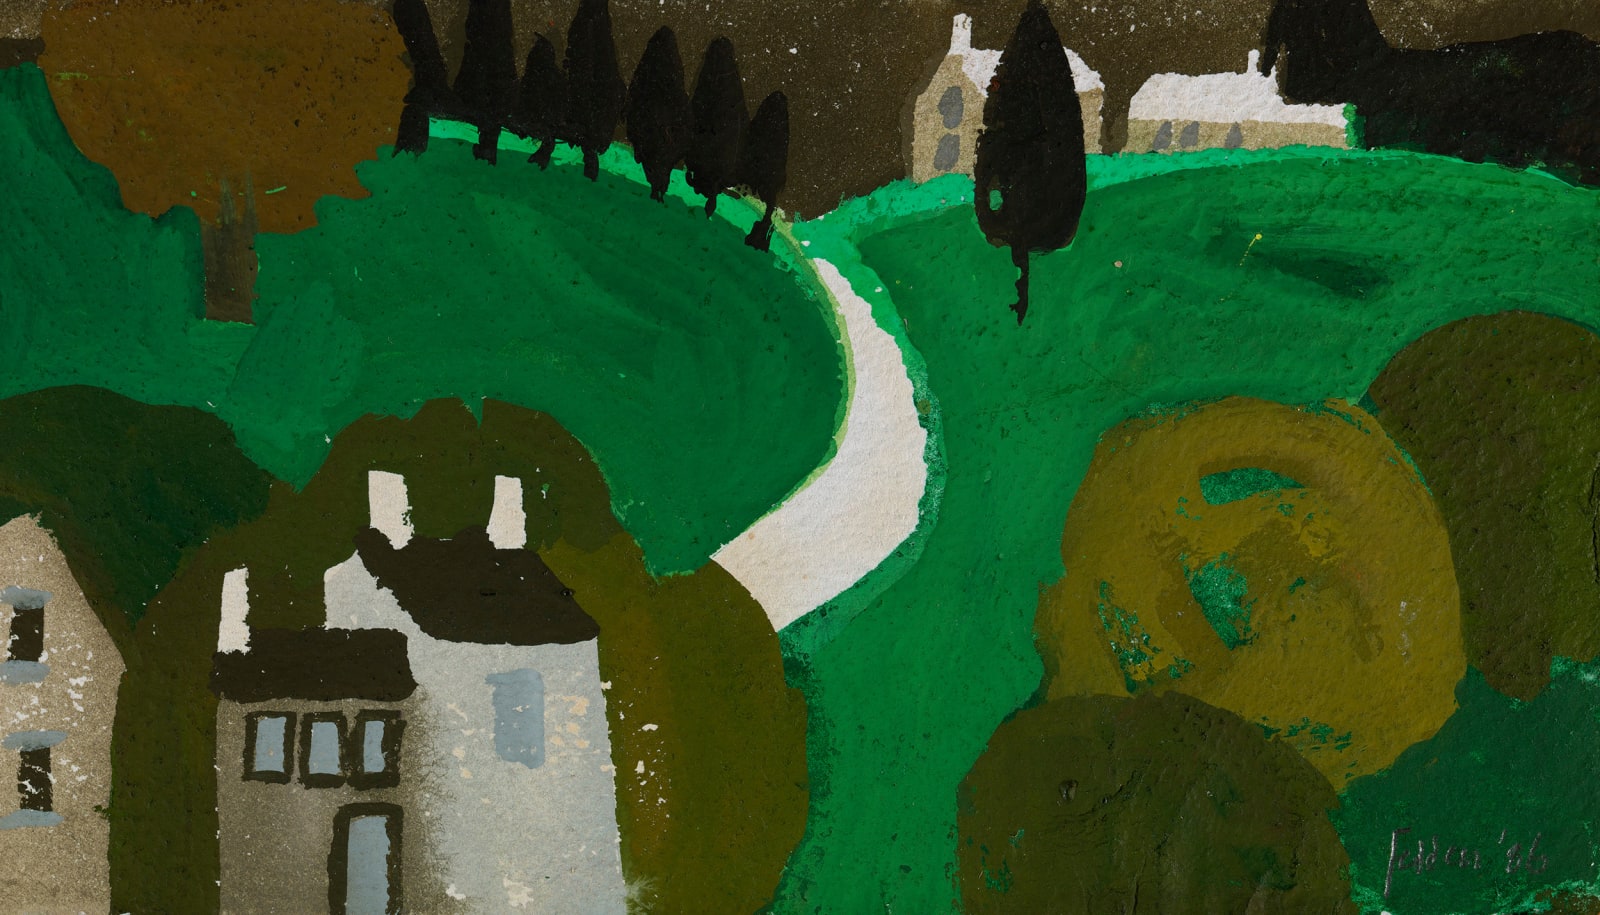 Mary Fedden, Landscape study, 1986